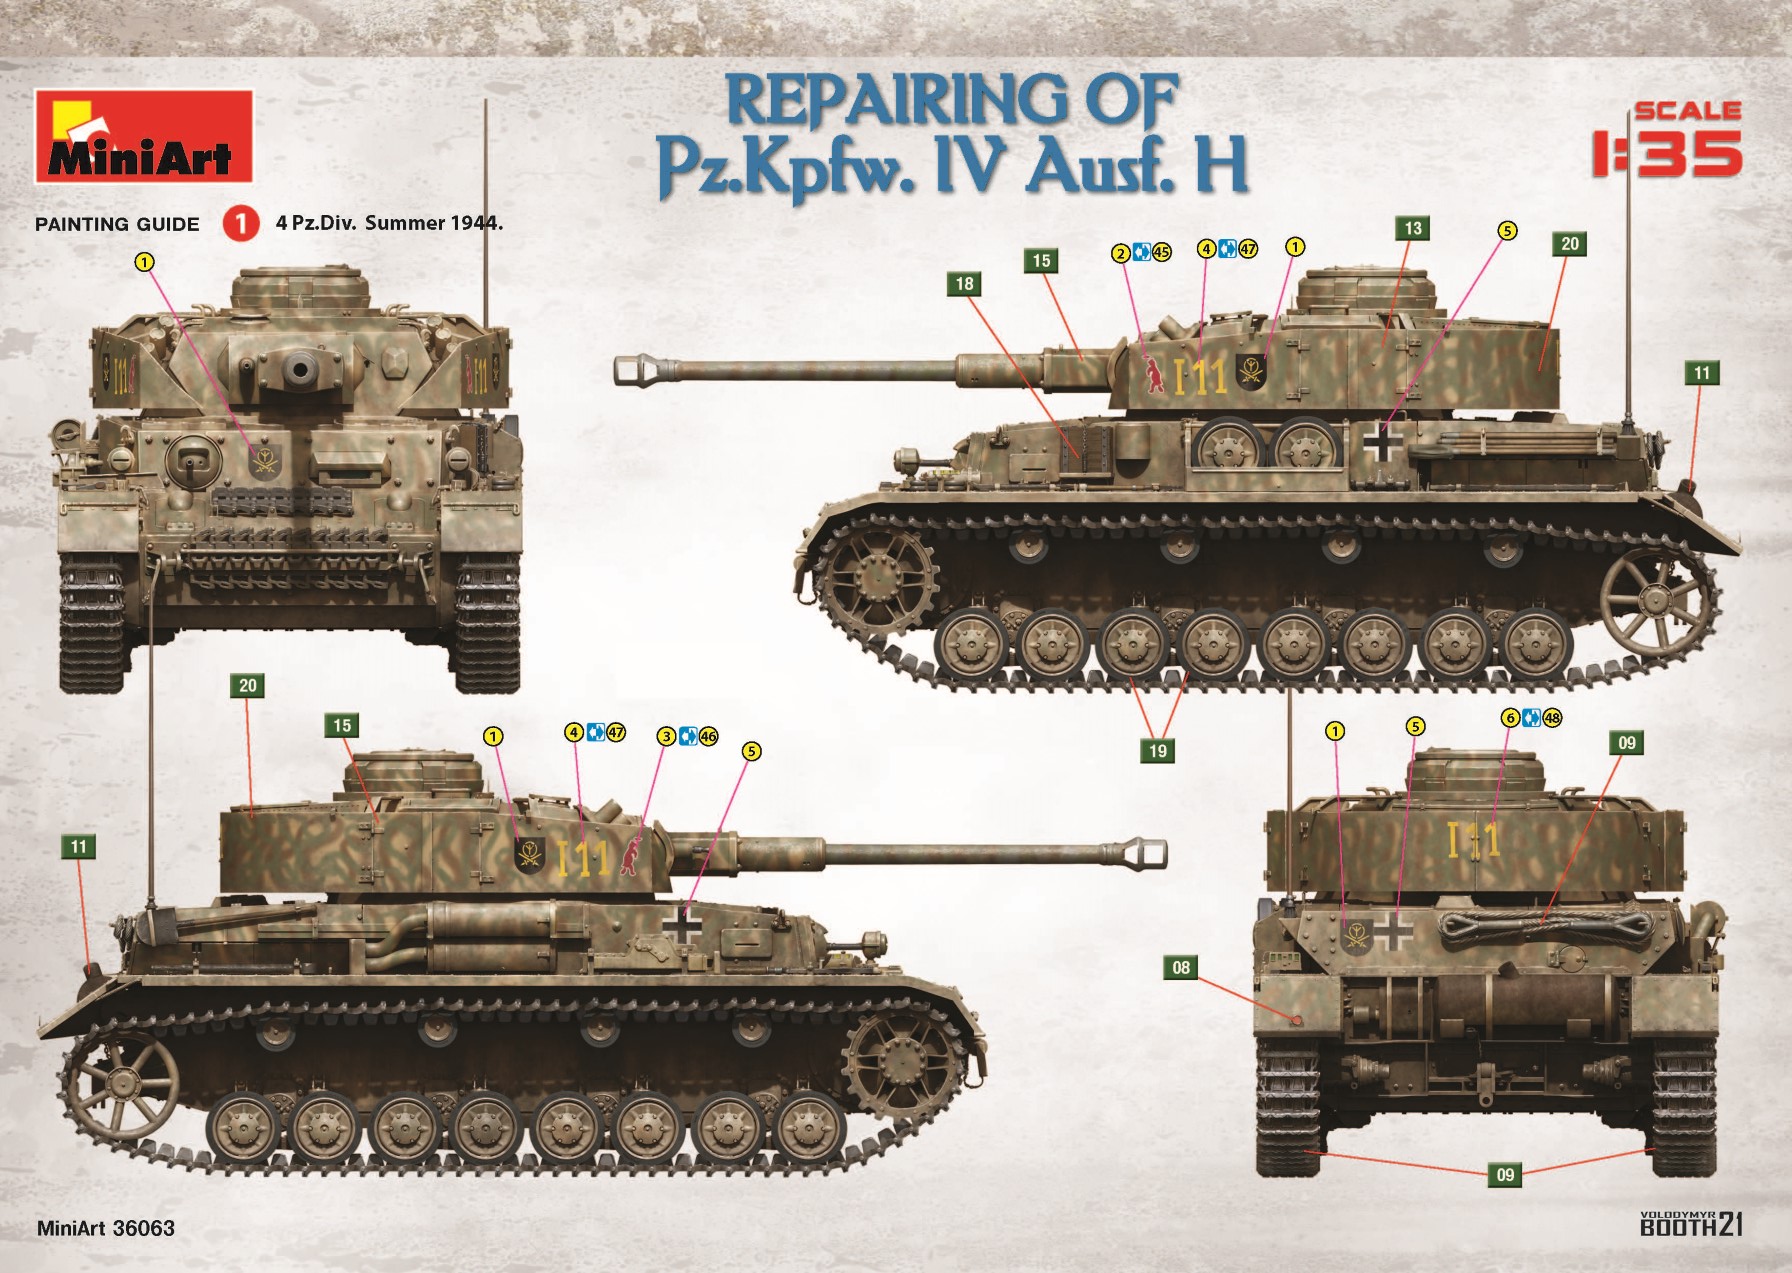 The Modelling News: Preview: MiniArt's Big Box Repairing Of Pz